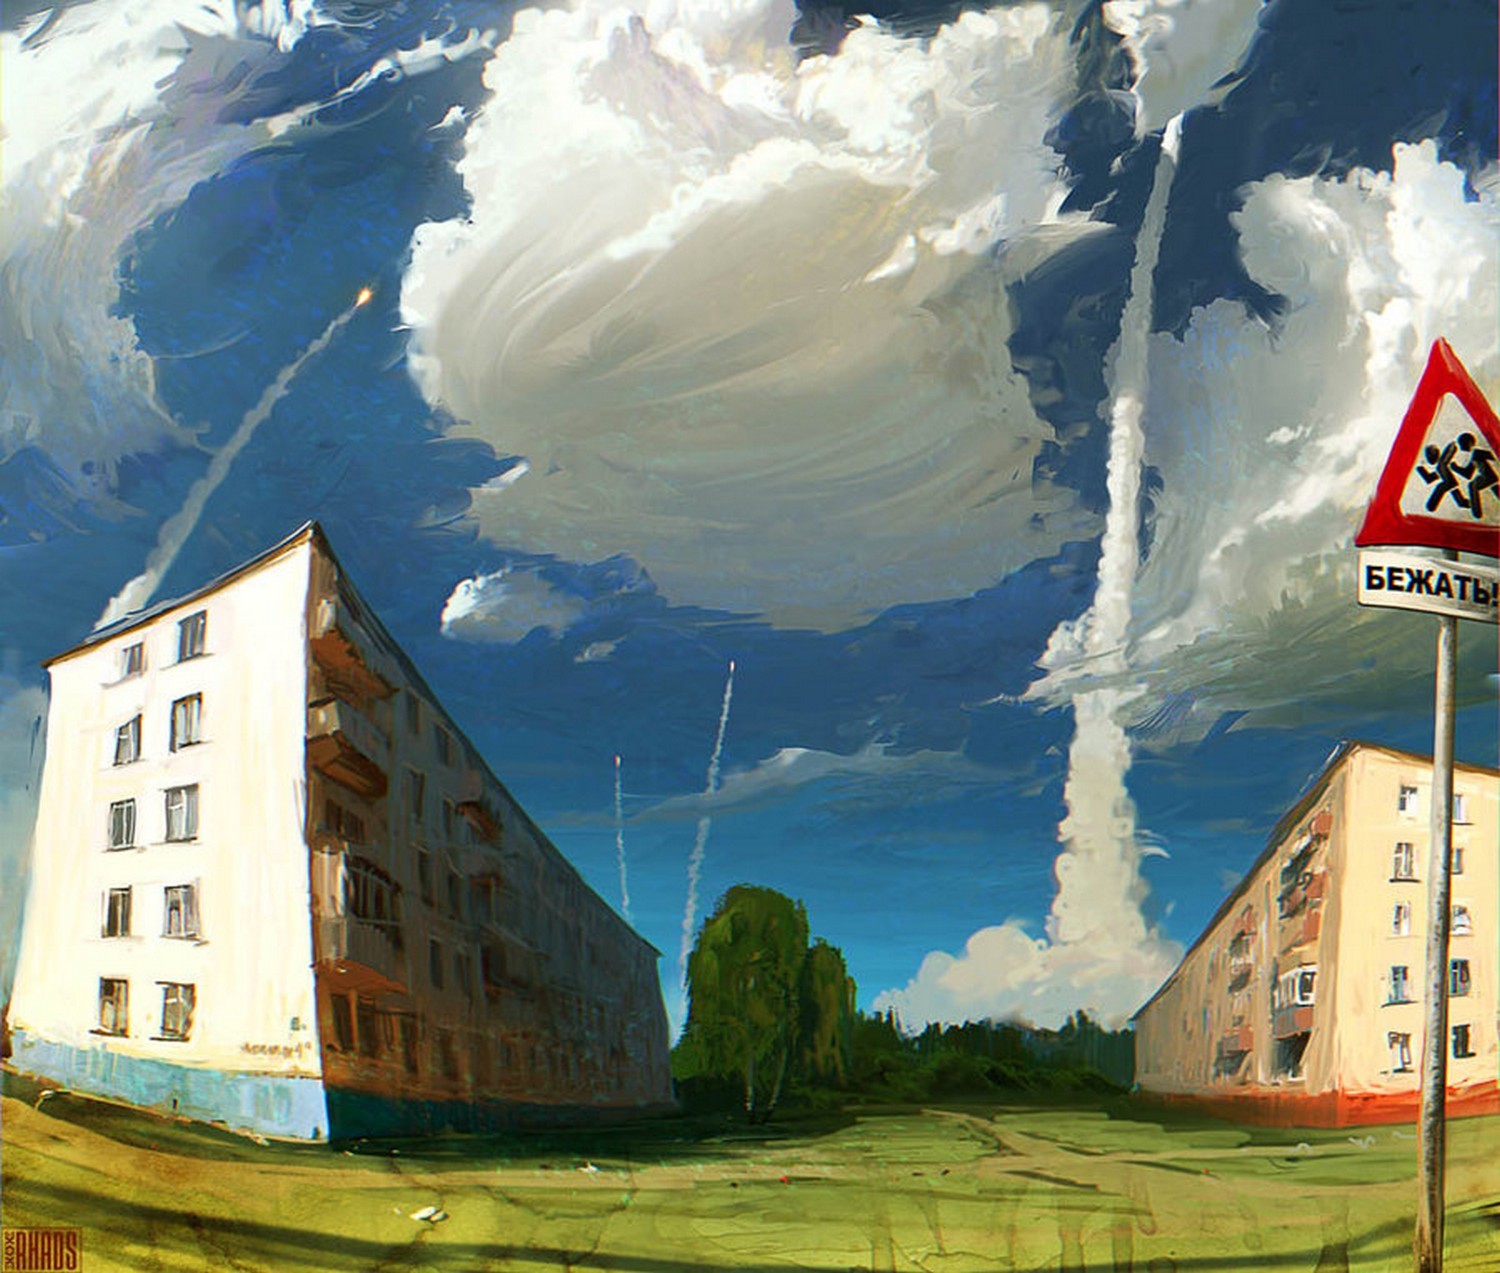 General 1500x1273 landscape sky clouds Russian missiles artwork sign apocalyptic house building